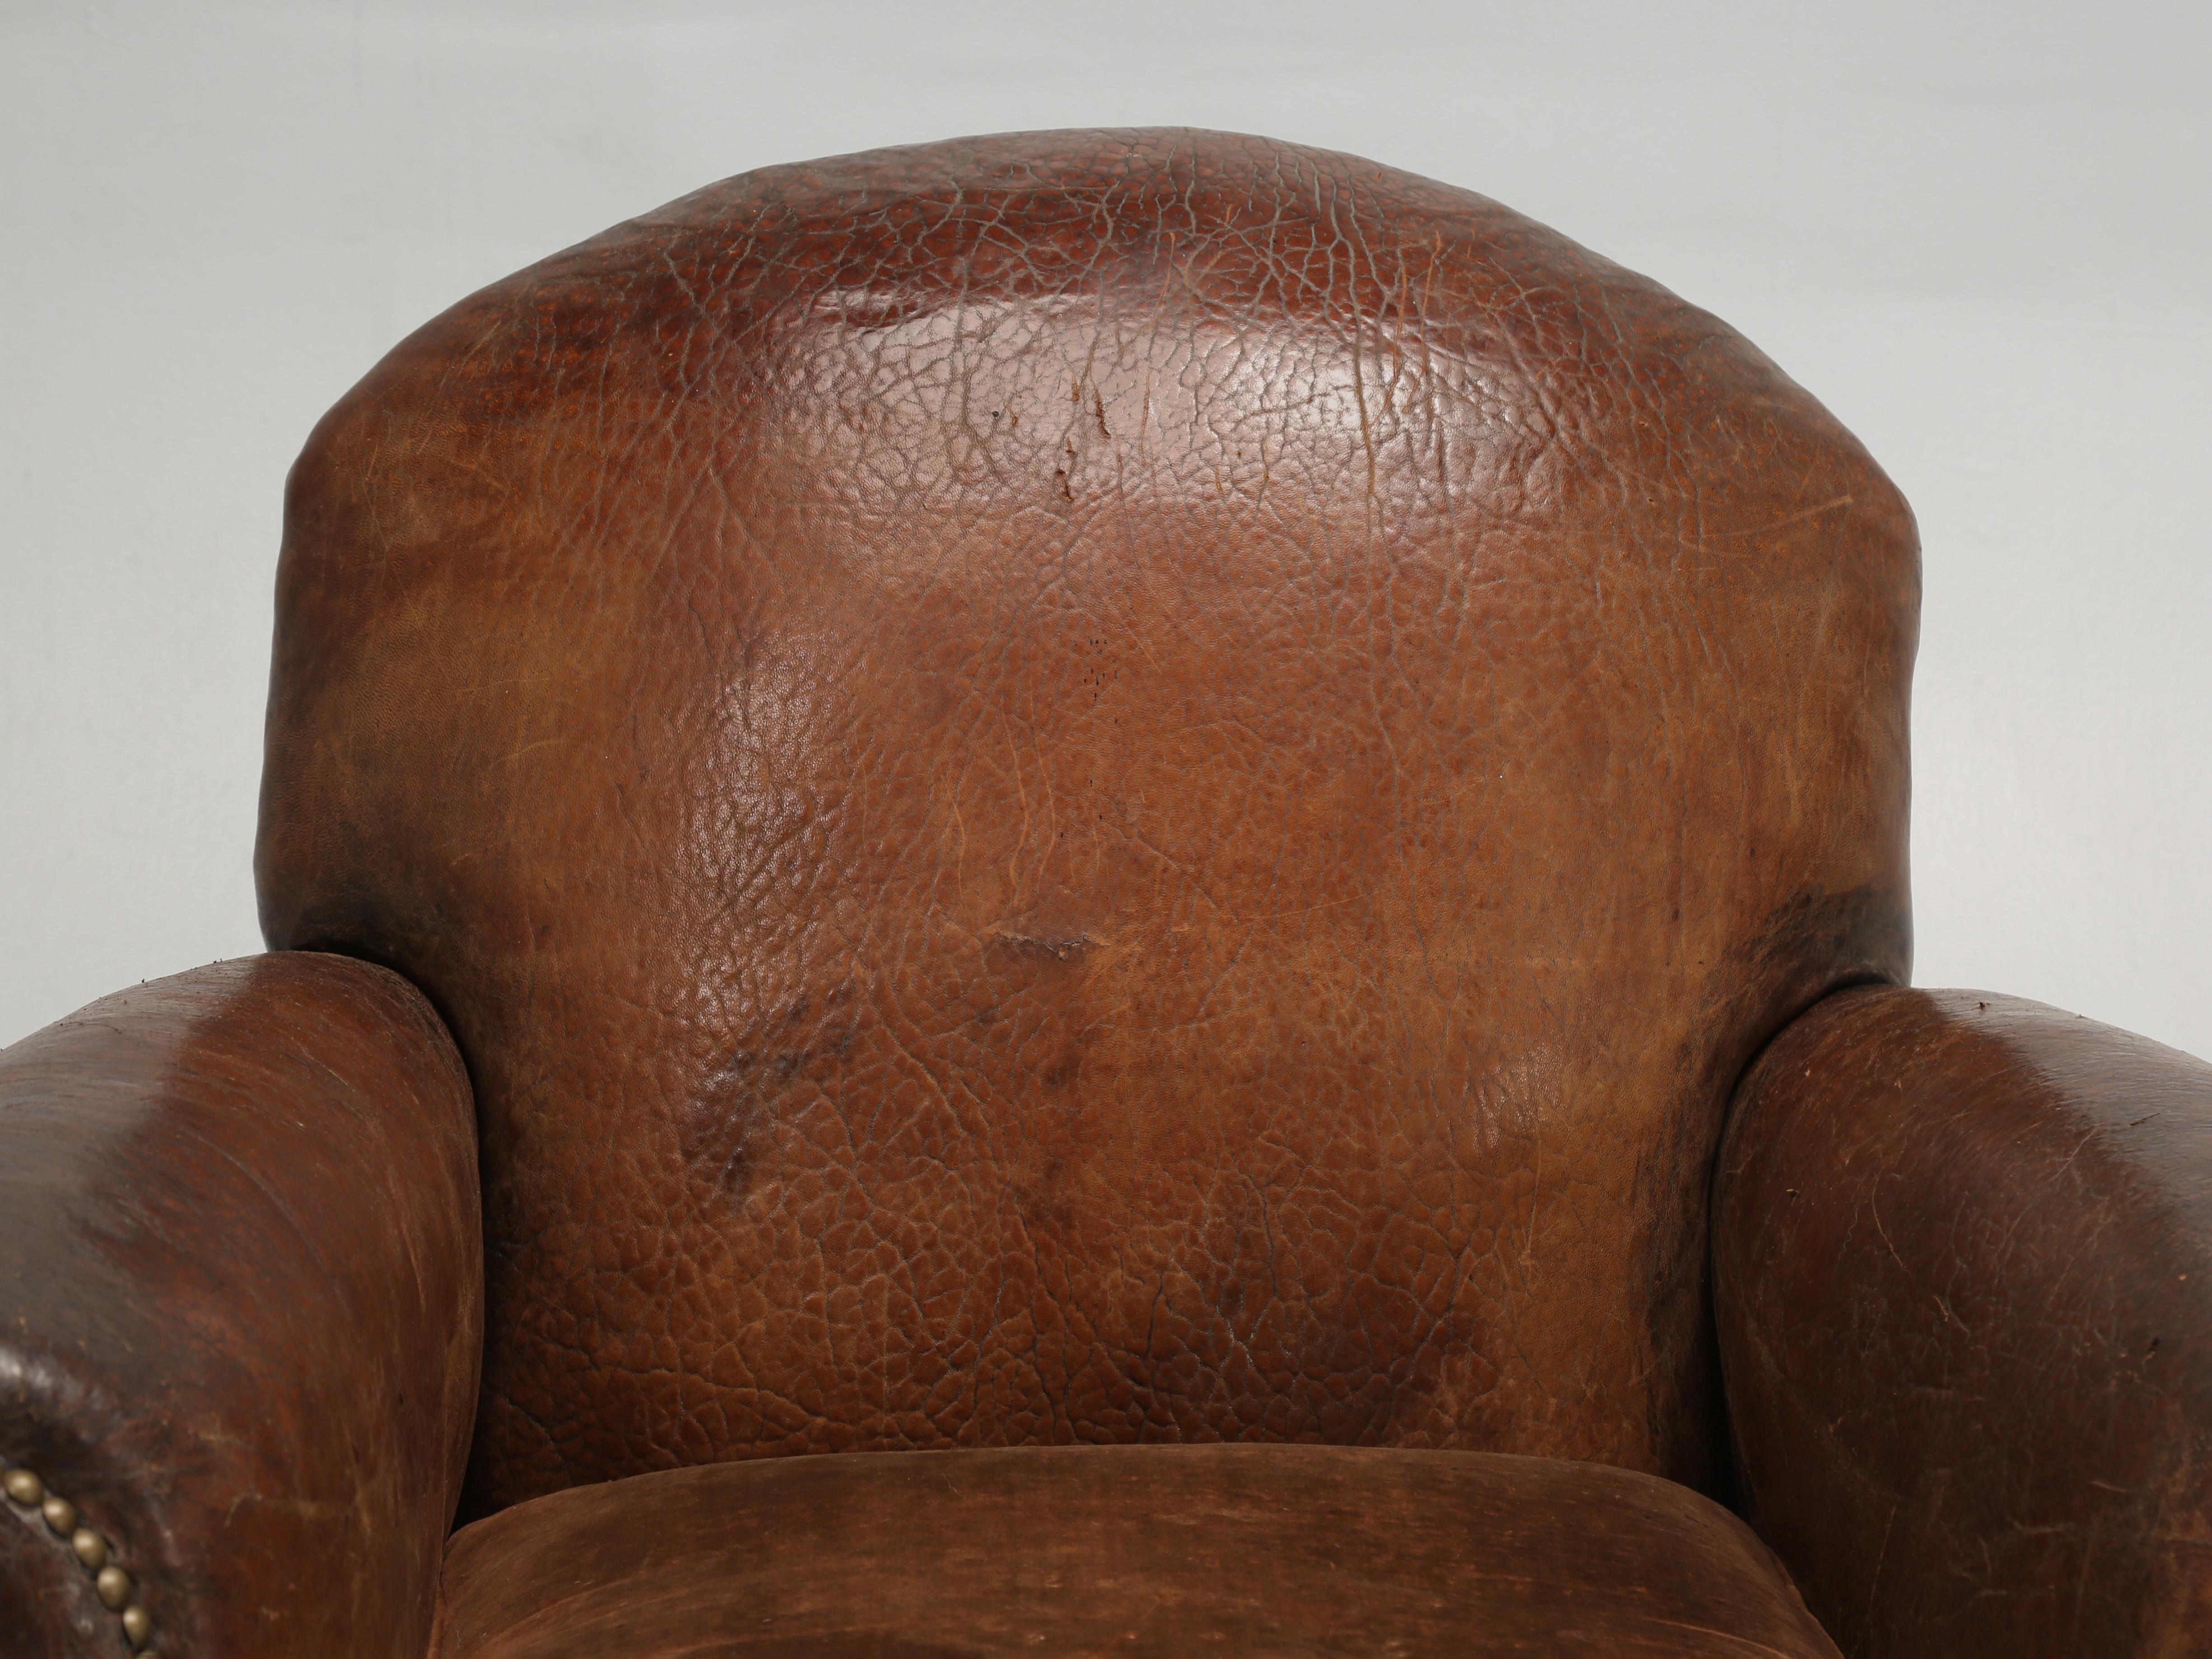 French leather pair of club chairs, but not just any old French leather club chairs, for this pair was painstakingly disassembled, restored internally, while only using the original padding material of horsehair and shredded coco fibers. After which